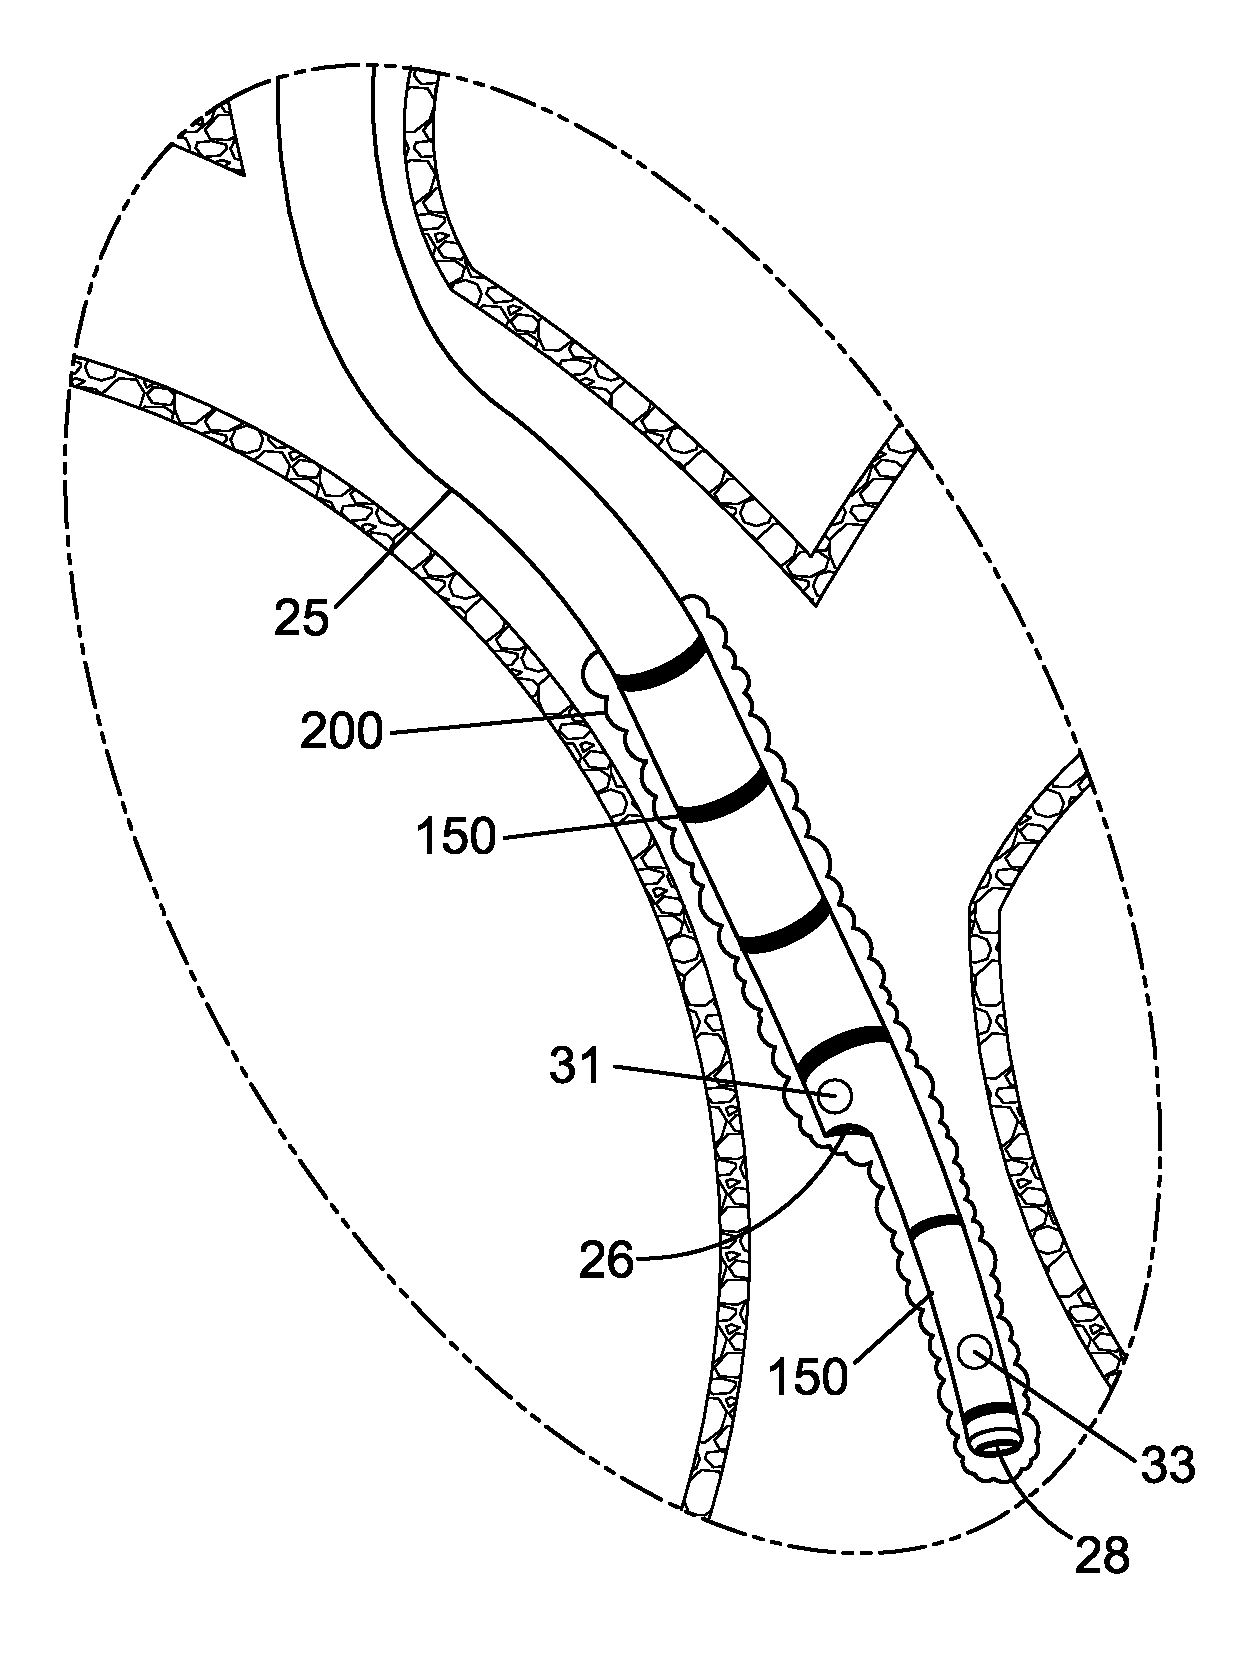 Device and method for the ablation of fibrin sheath formation on a venous catheter